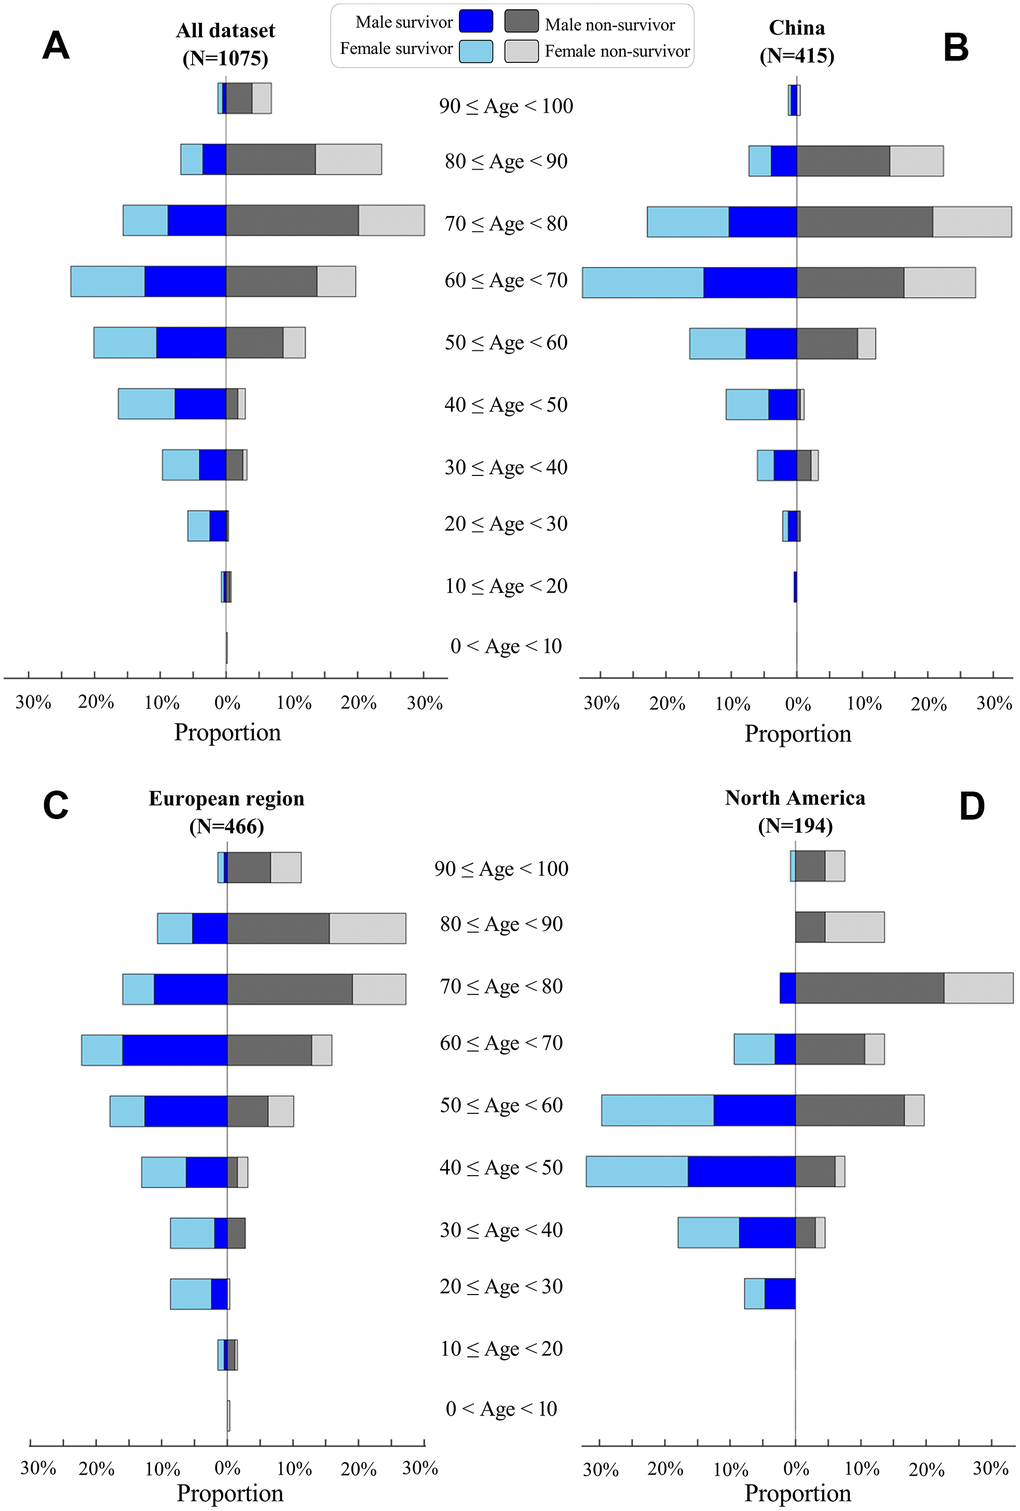 Age distribution of COVID-19 patients. Proportions of survivors (left) and non-survivors (right) at different age classes are visualized for all patients (A), patients in China (B), patients in European regions (C), and patients in North America (D). For survivors, male and female proportions are visualized by blue and light-blue, respectively. For non-survivors, male and female proportions are visualized by black and gray, respectively.